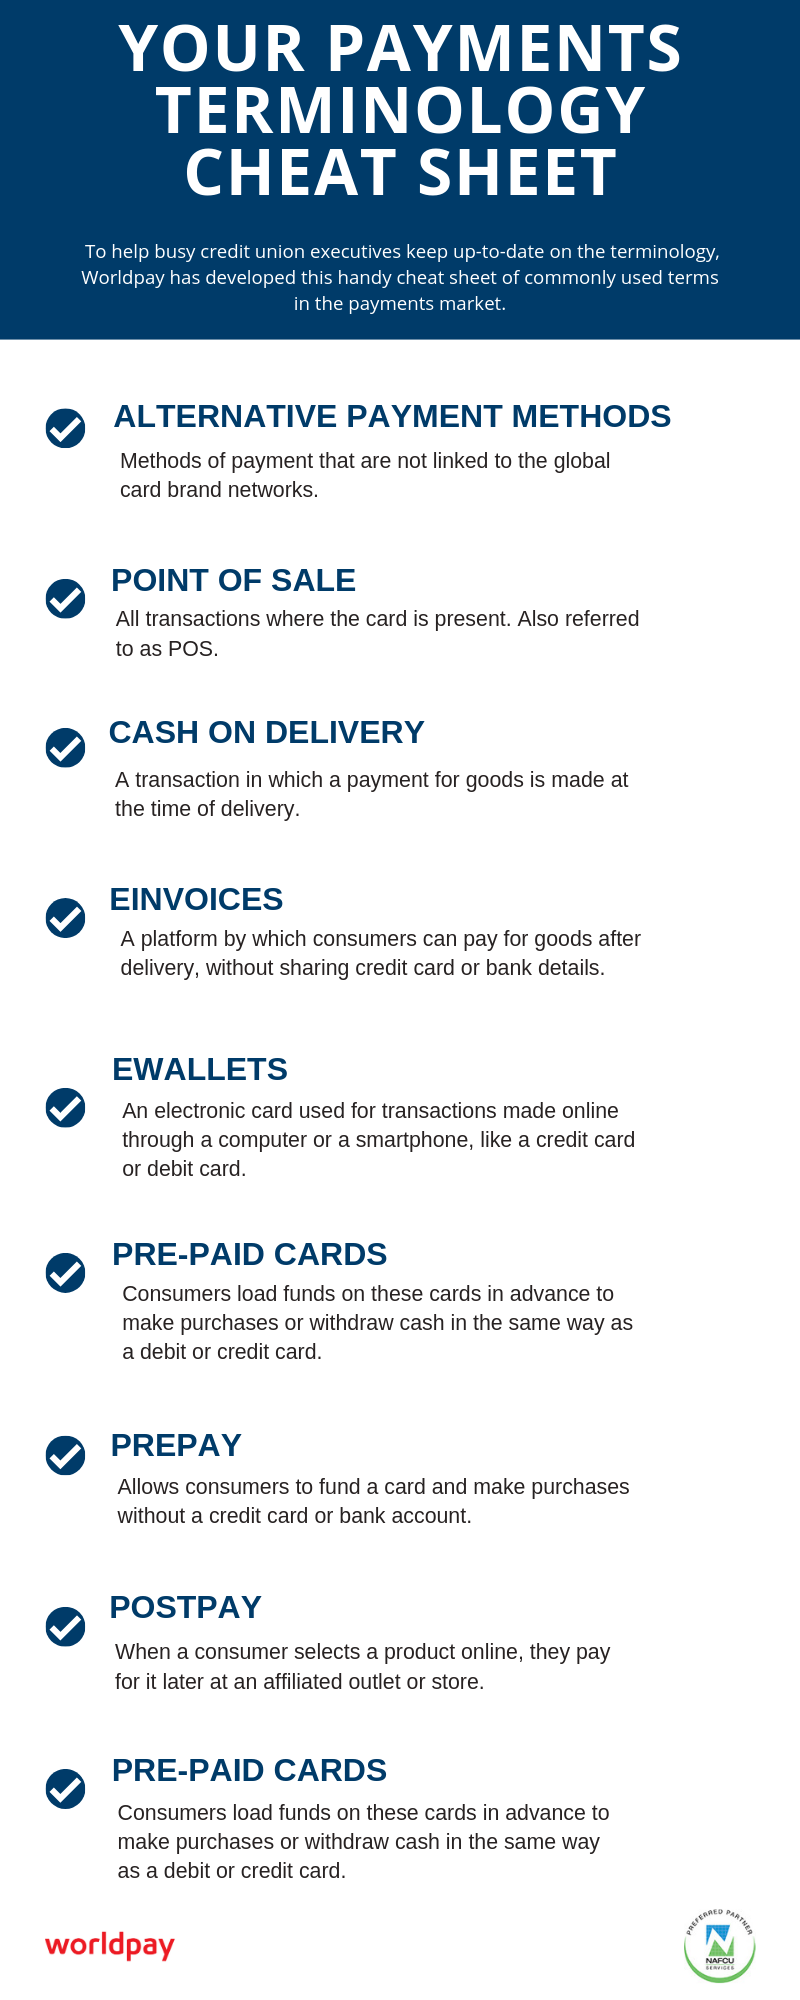 Infographic: Your Payments Terminology Cheat Sheet